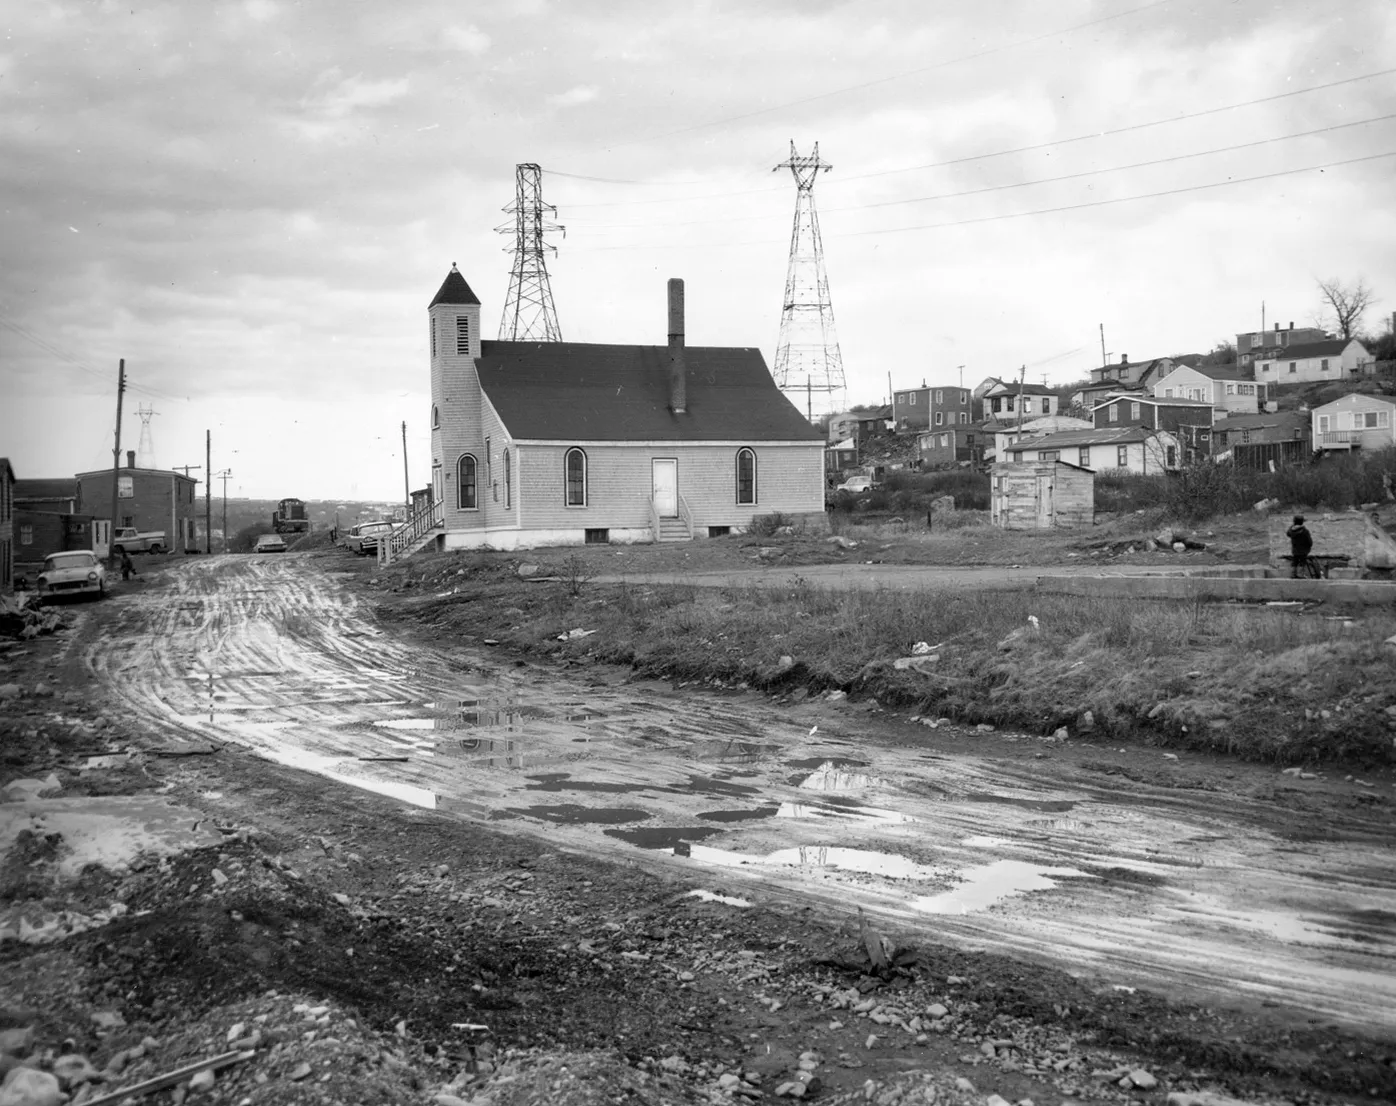 A black and white photo of a church and a dirt road